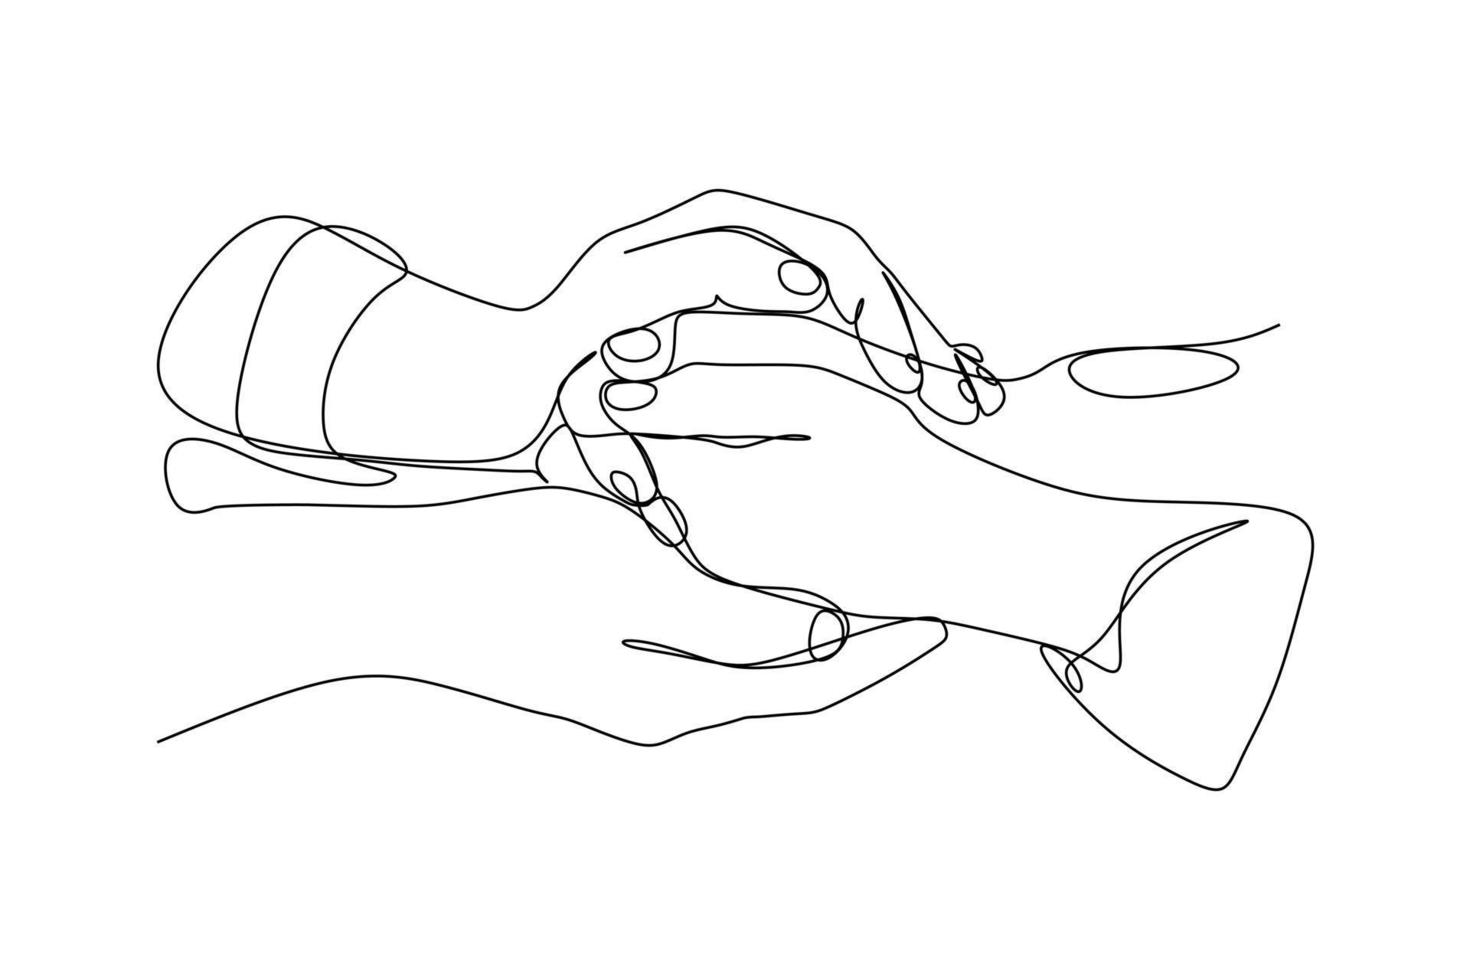 Single continuous line drawing of hold hand for caring and show sympathy to other. Hand drawn style vector illustration for social and business advertisement